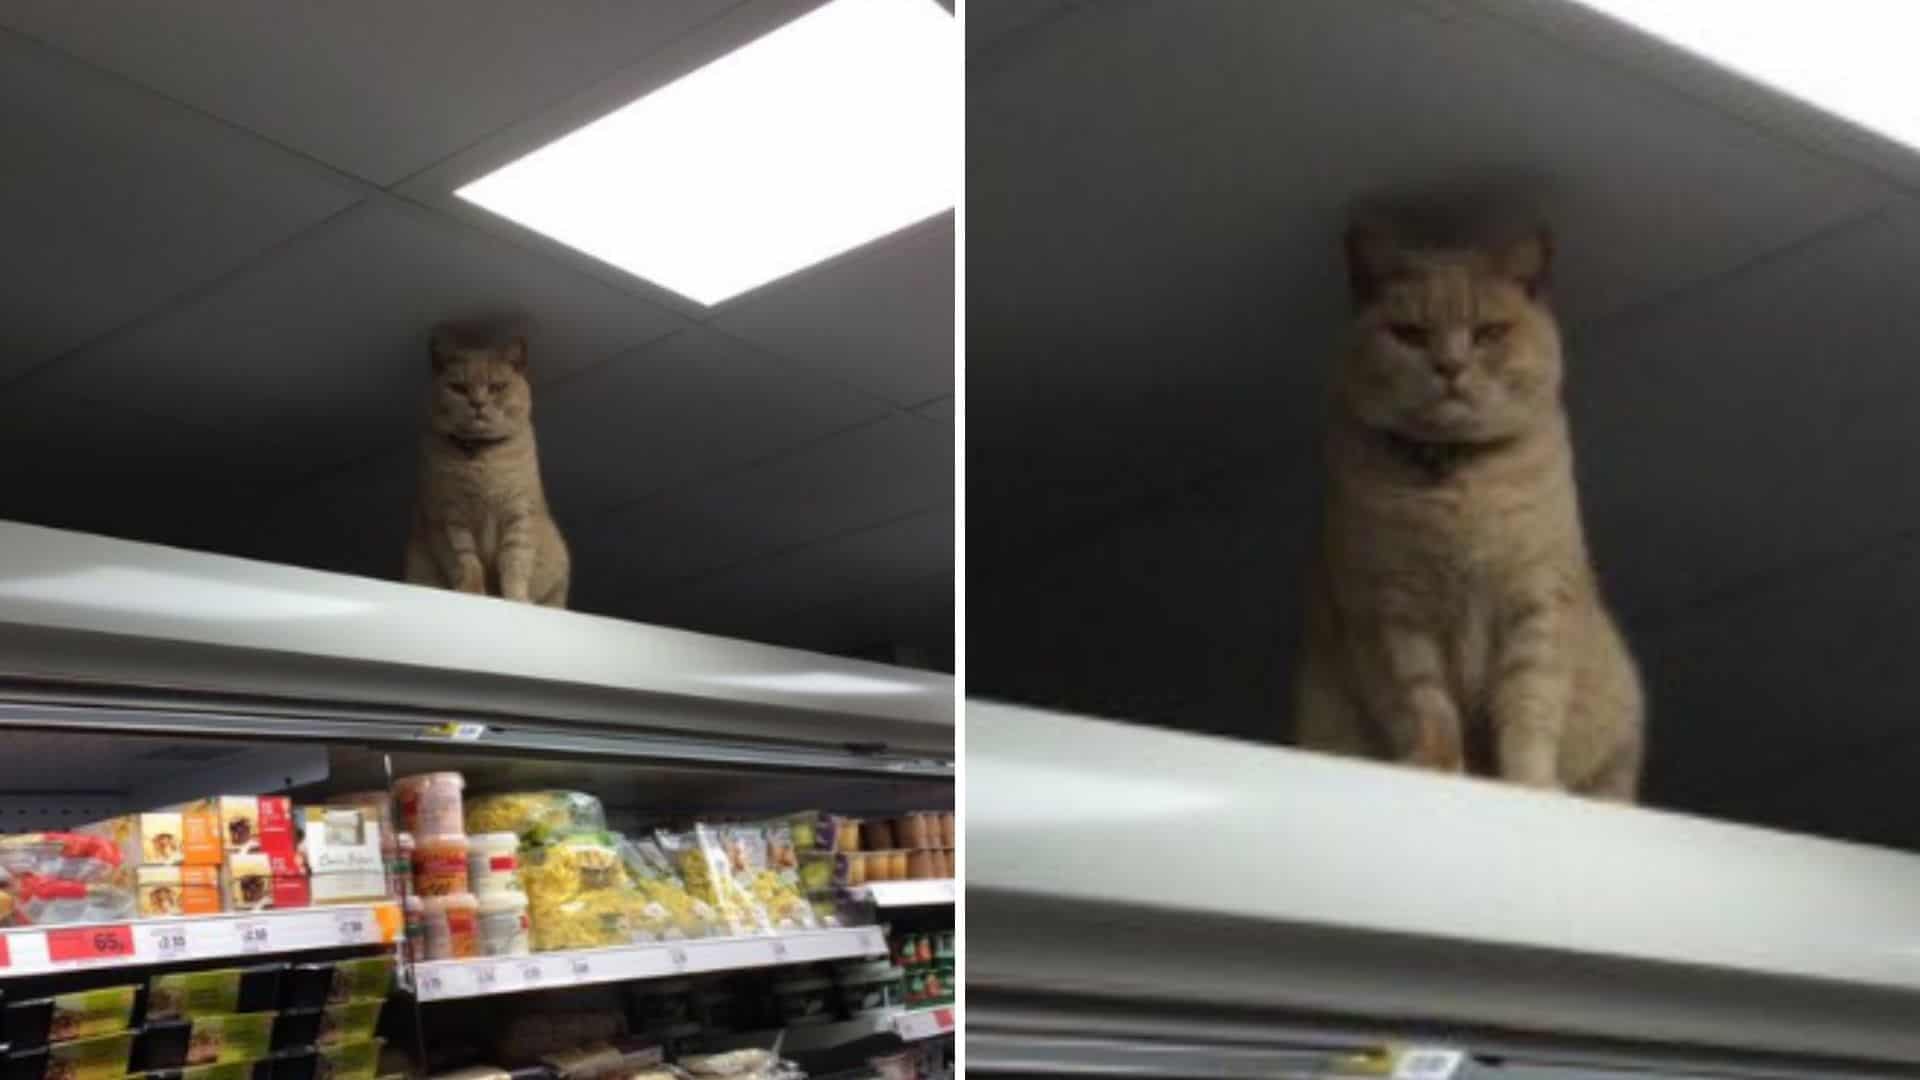 the cat is standing on the shelves in the supermarket